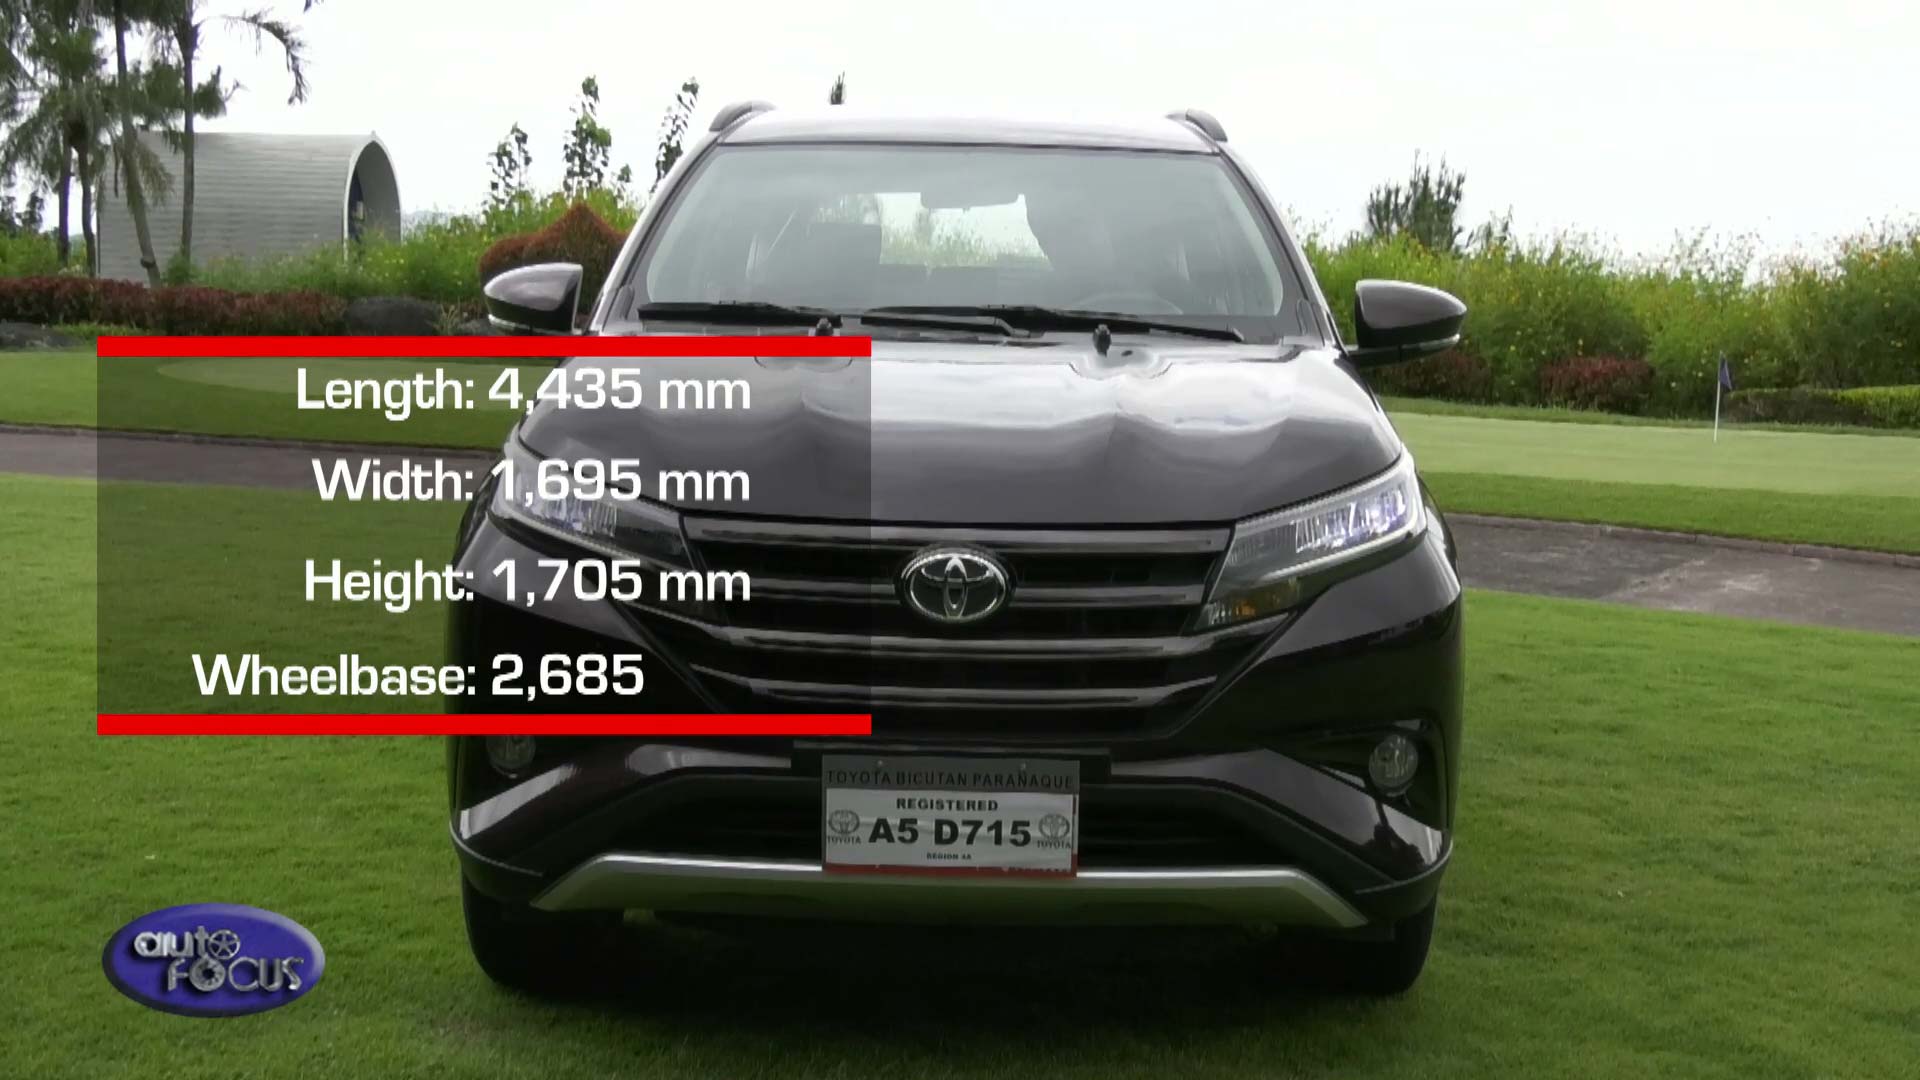 Production Models Toyota Rush 1 5g Review Auto Focus